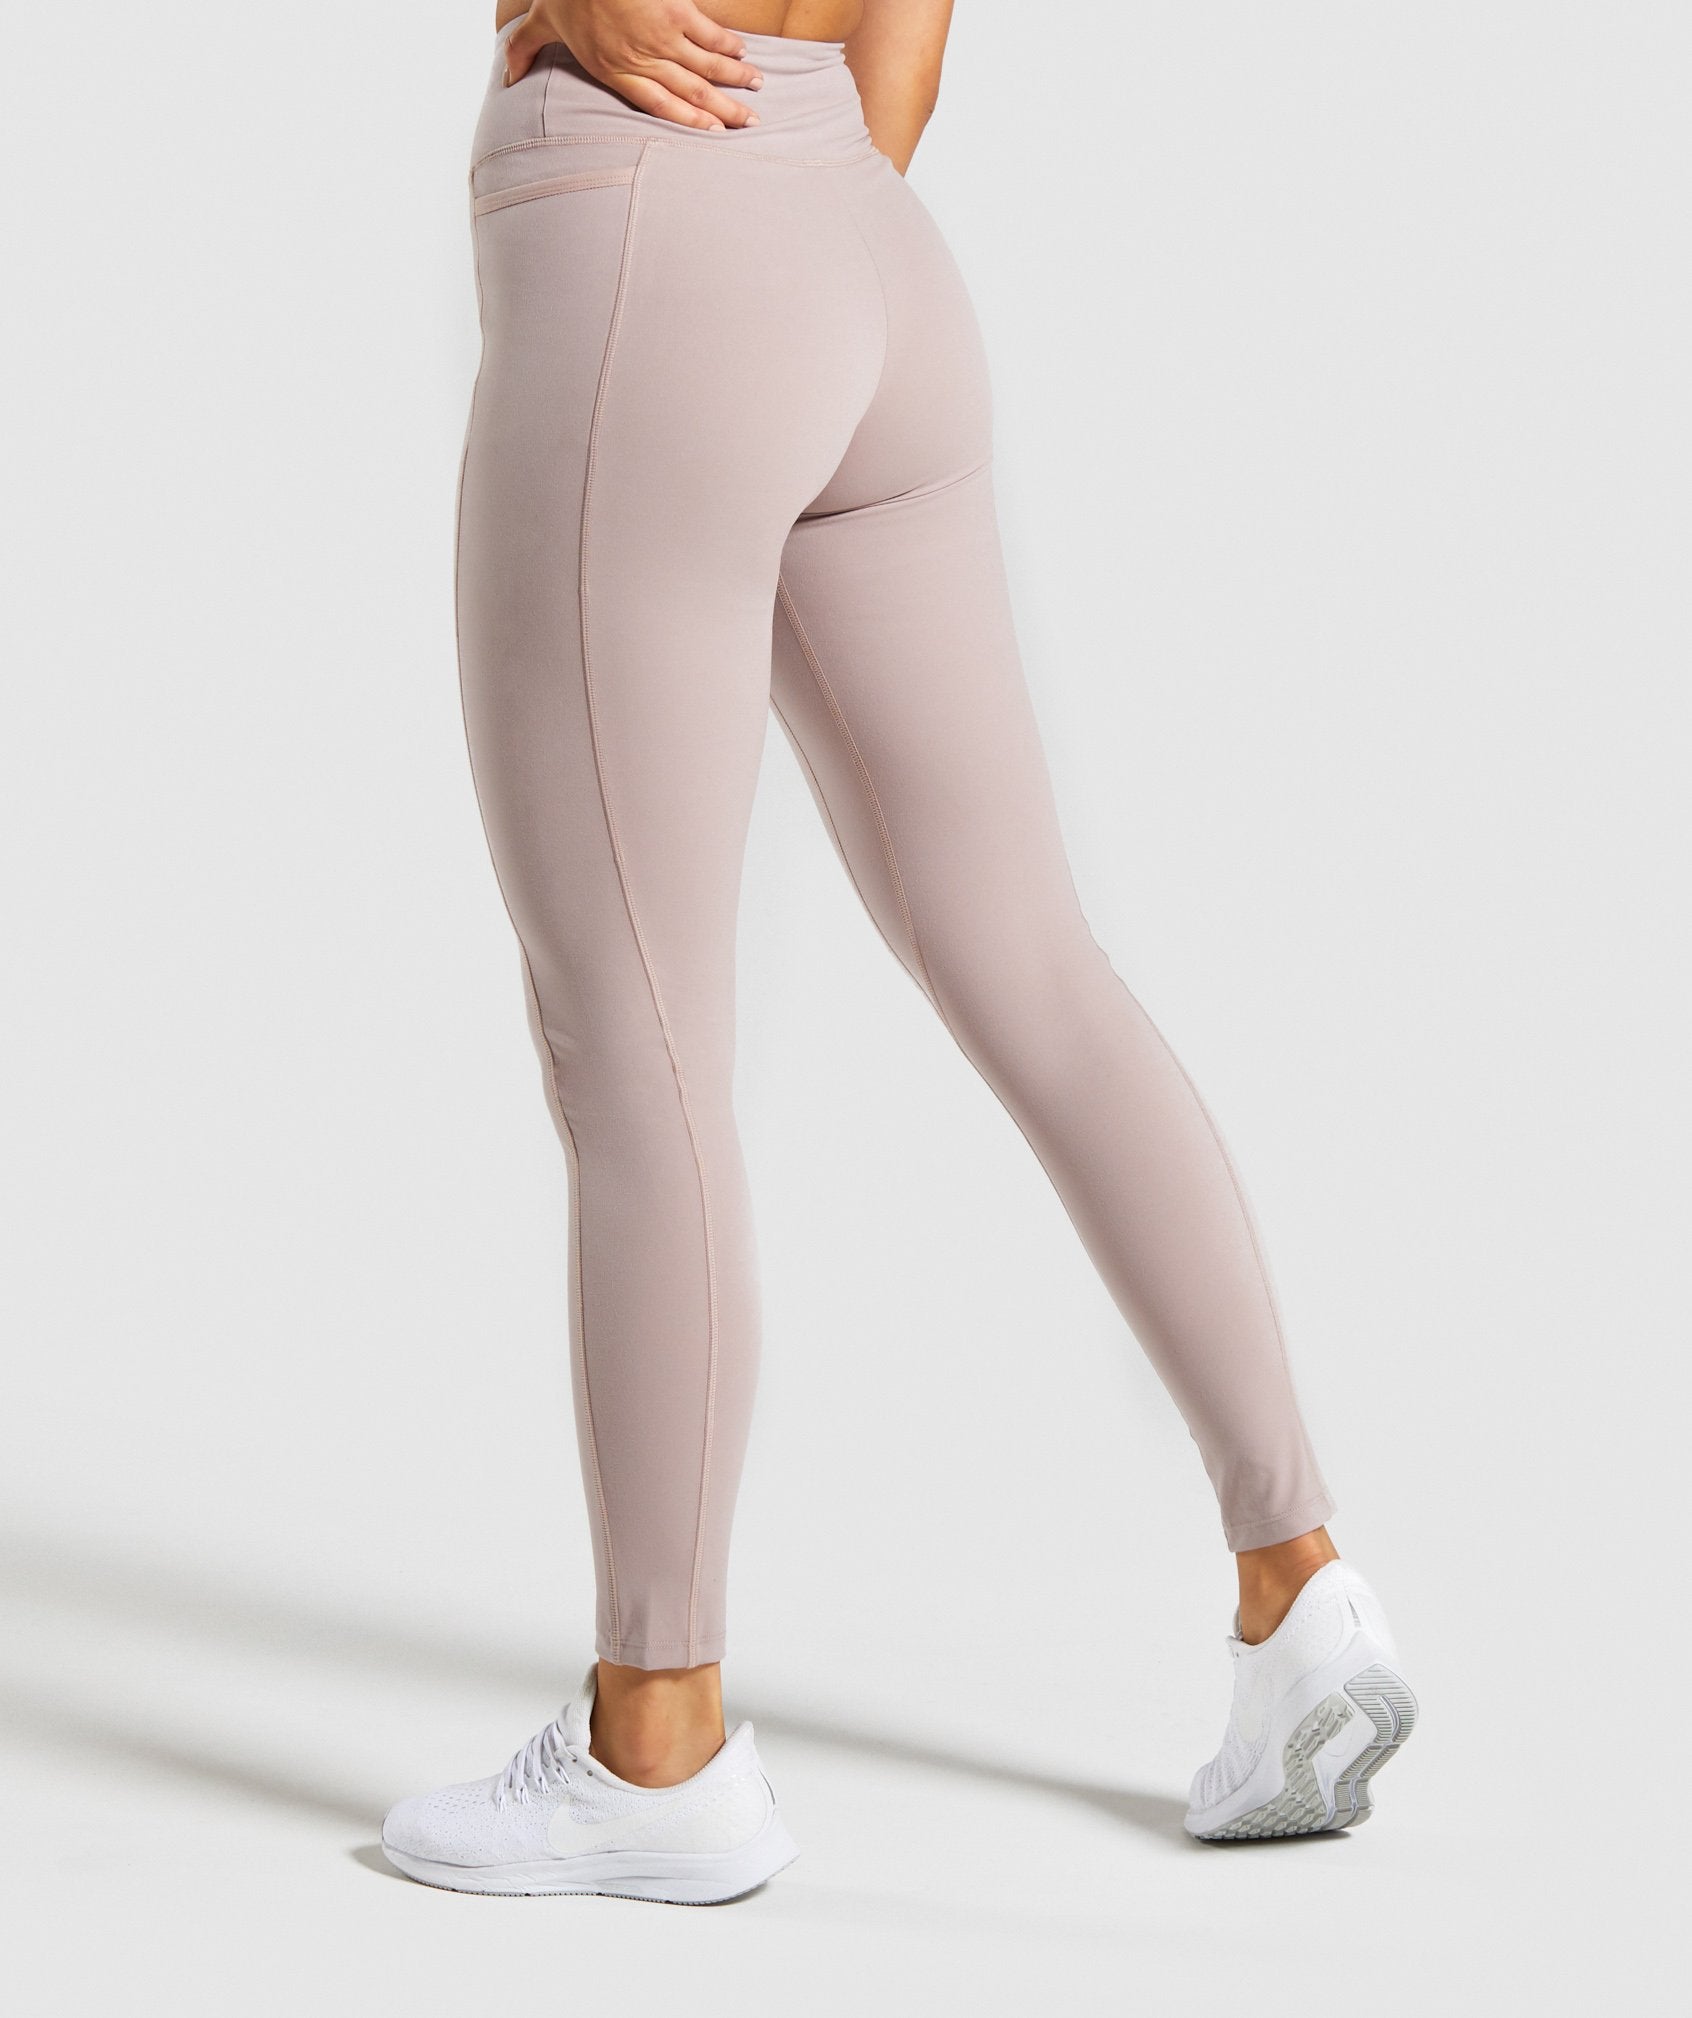 Dreamy Leggings in Taupe/white